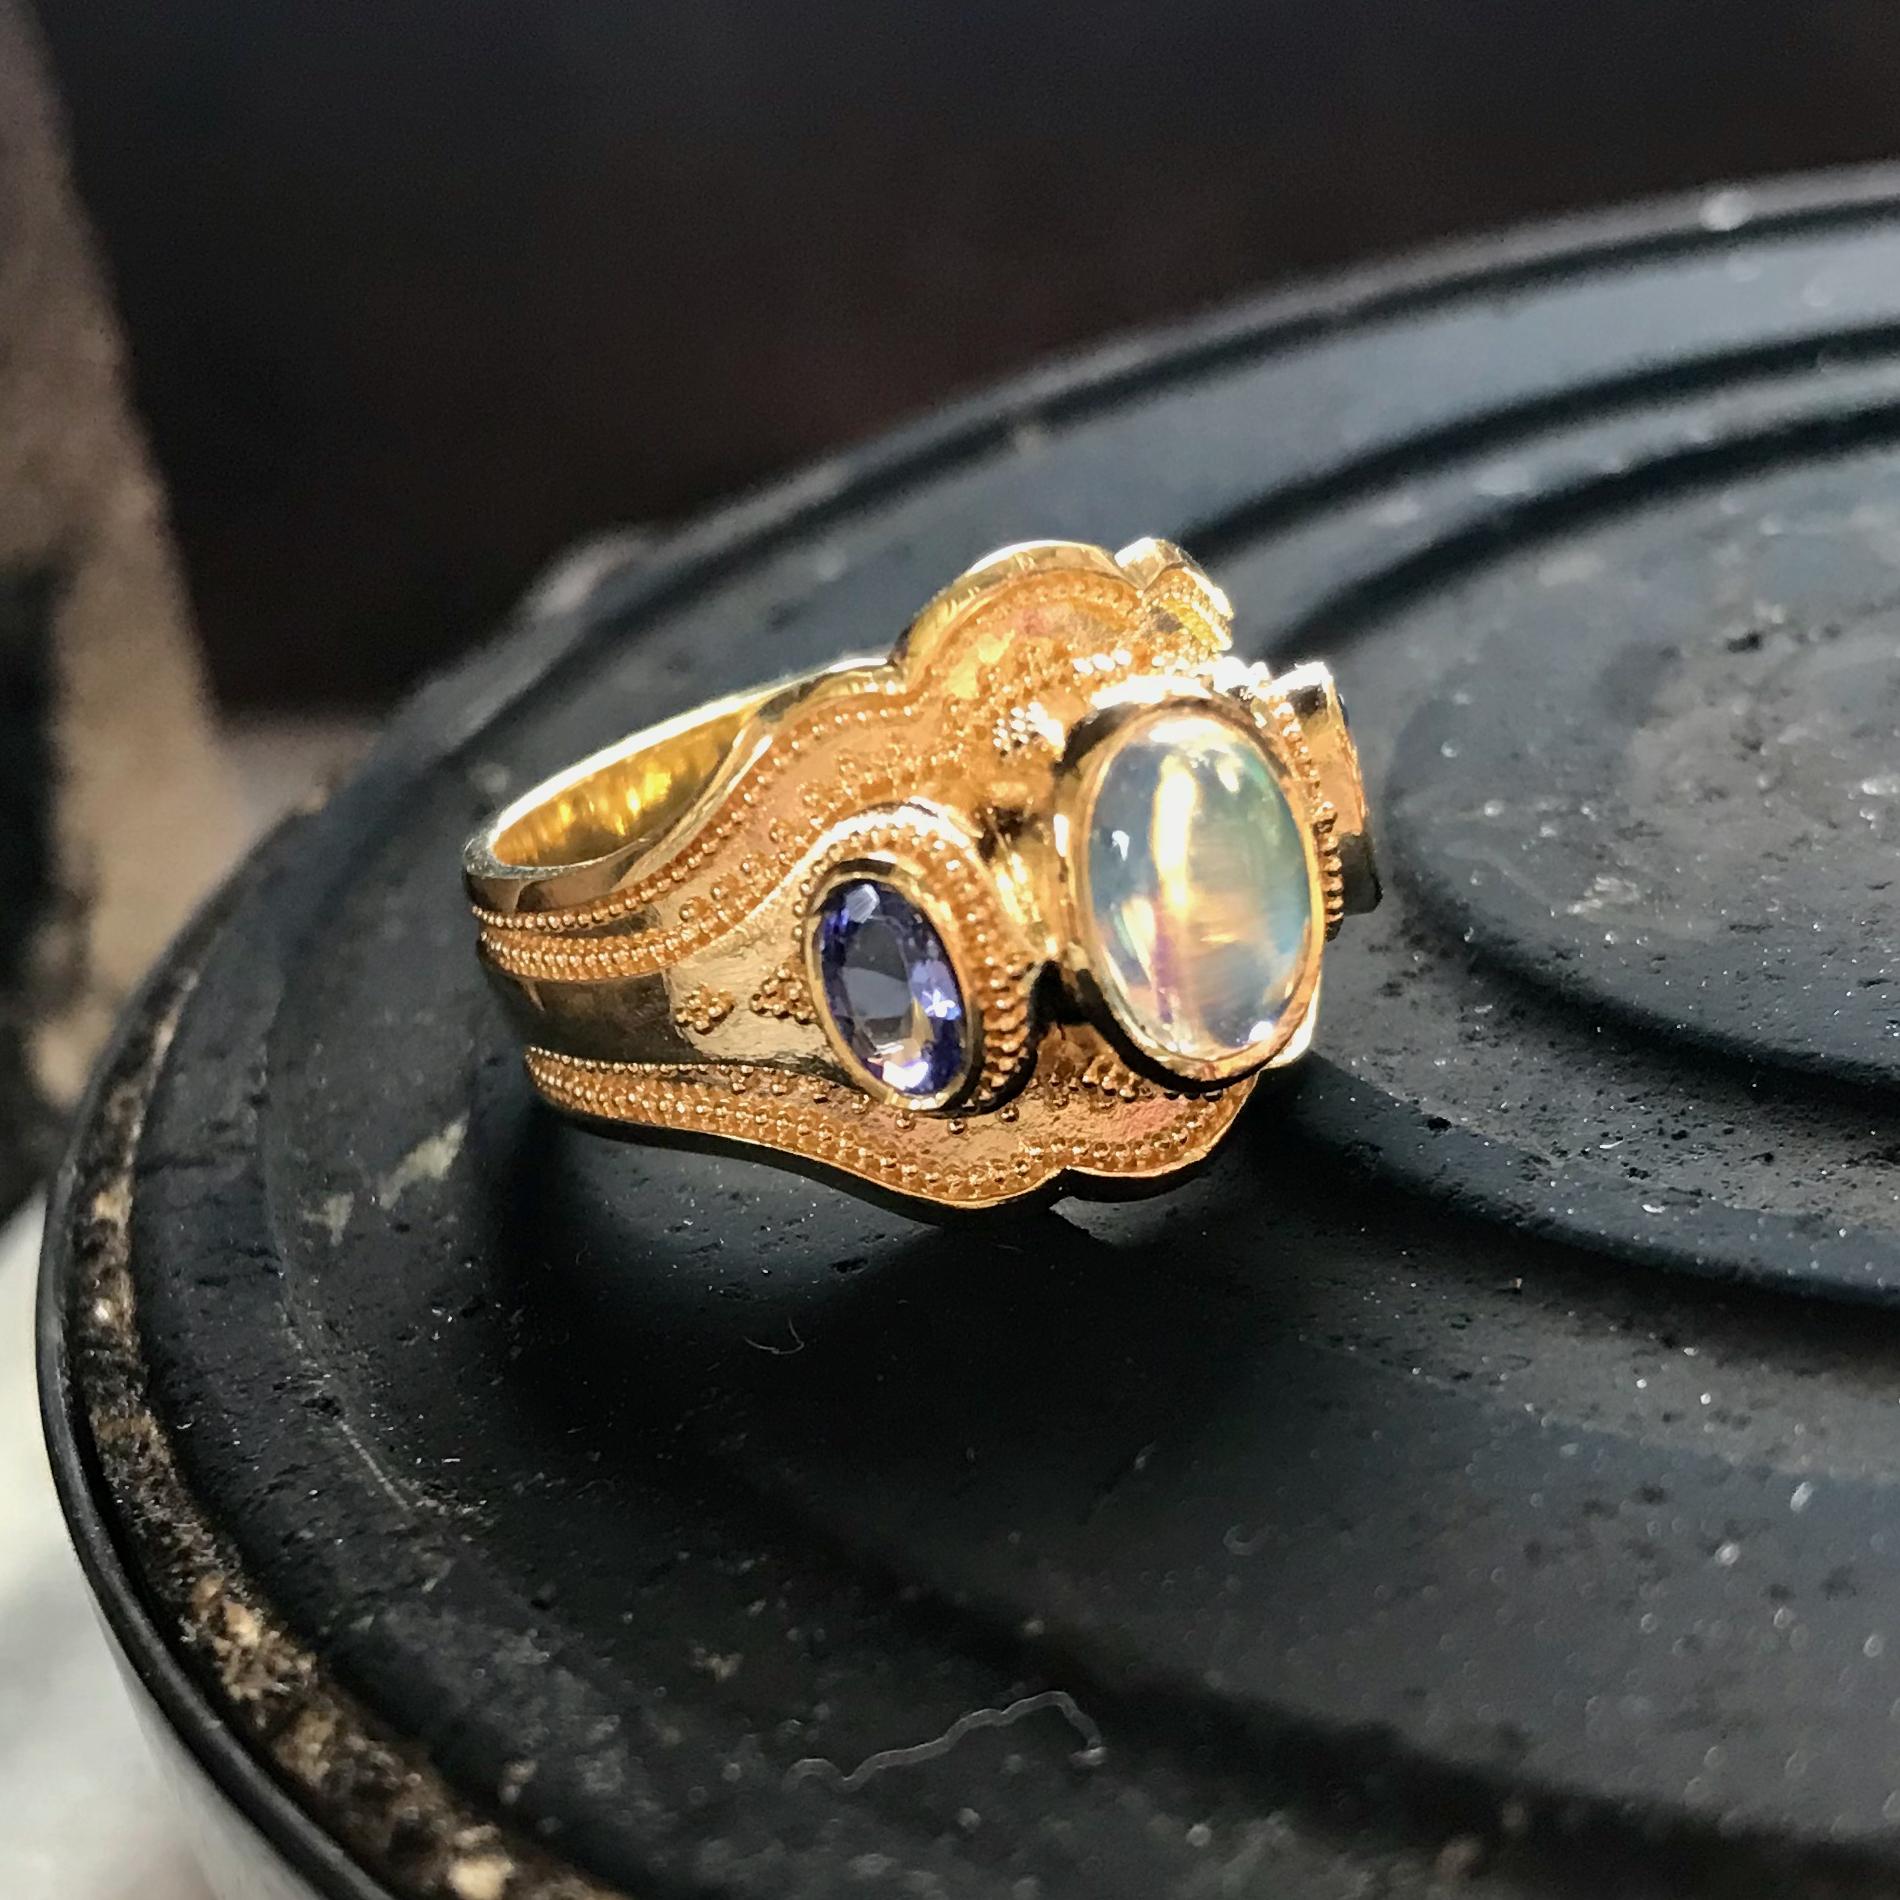 From the Kent Raible limited edition 'Studio Collection' we bring you our favorite 'Cigar Band' style ring of all time! It's got it all in perfect detailing.... We see the larger basic shape with lovely curves, then, a second band that wraps the